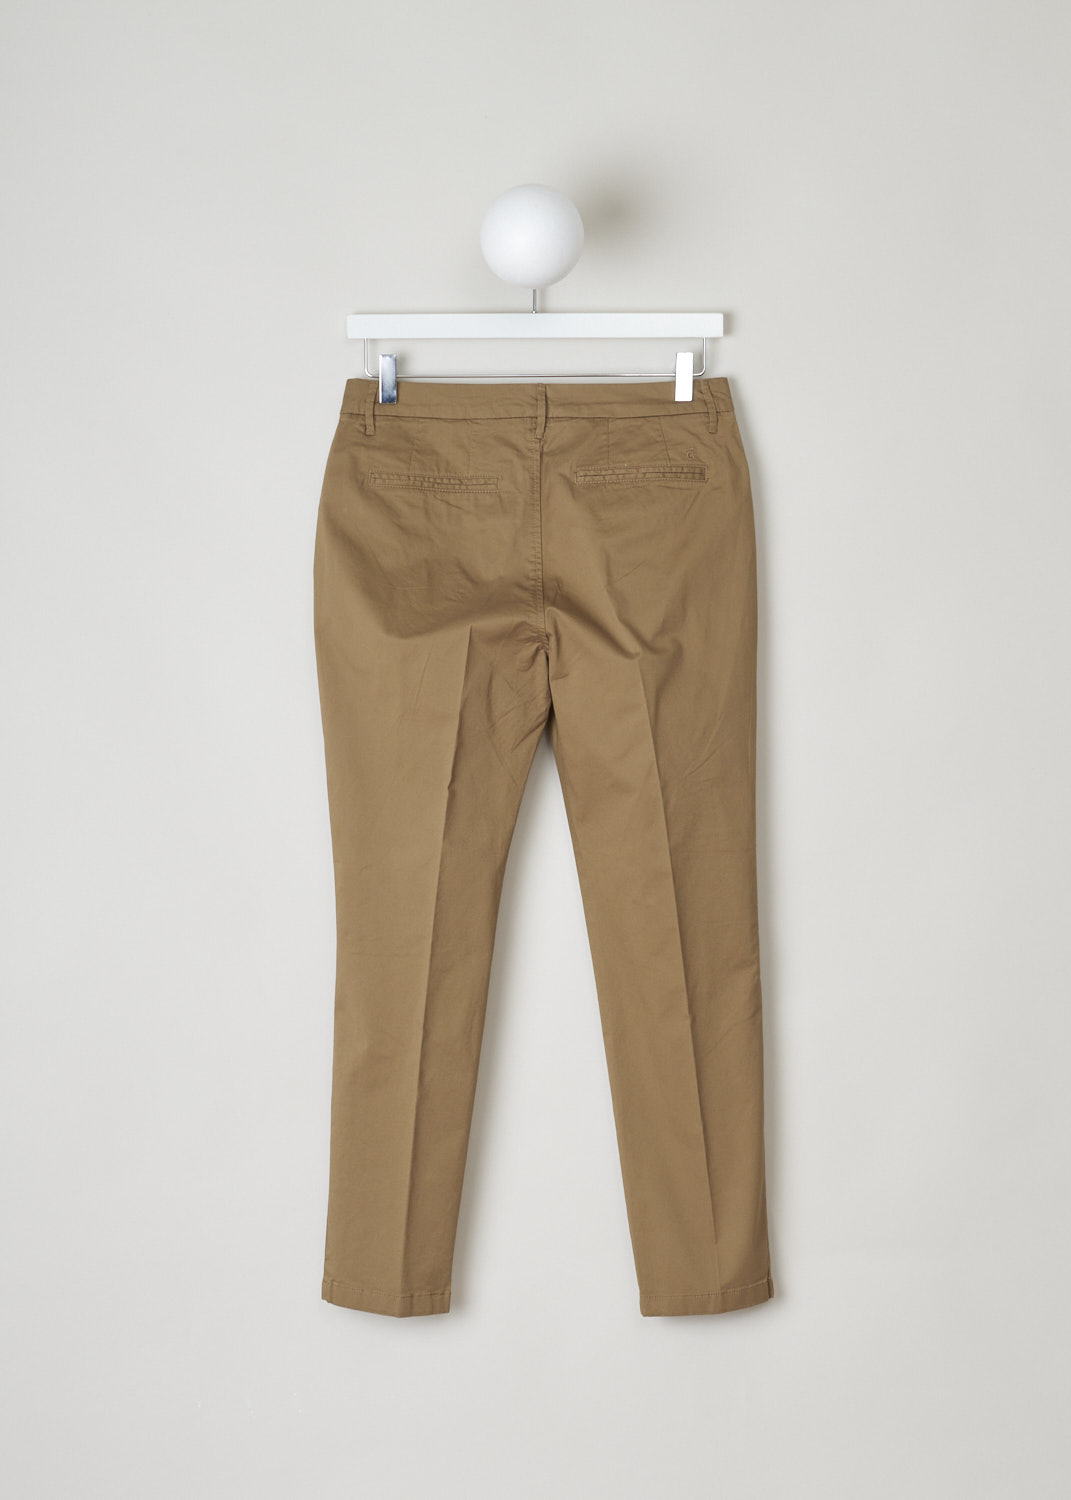 Closed, Caramel brown flat front chino, jack_C91012_30D_20_991, brown, back, This caramel brown flat front chino is one of those must have basics that goes well anything you throw on it. Featuring a regular length, two forward slanted pockets on the front and two welt pockets on the back.